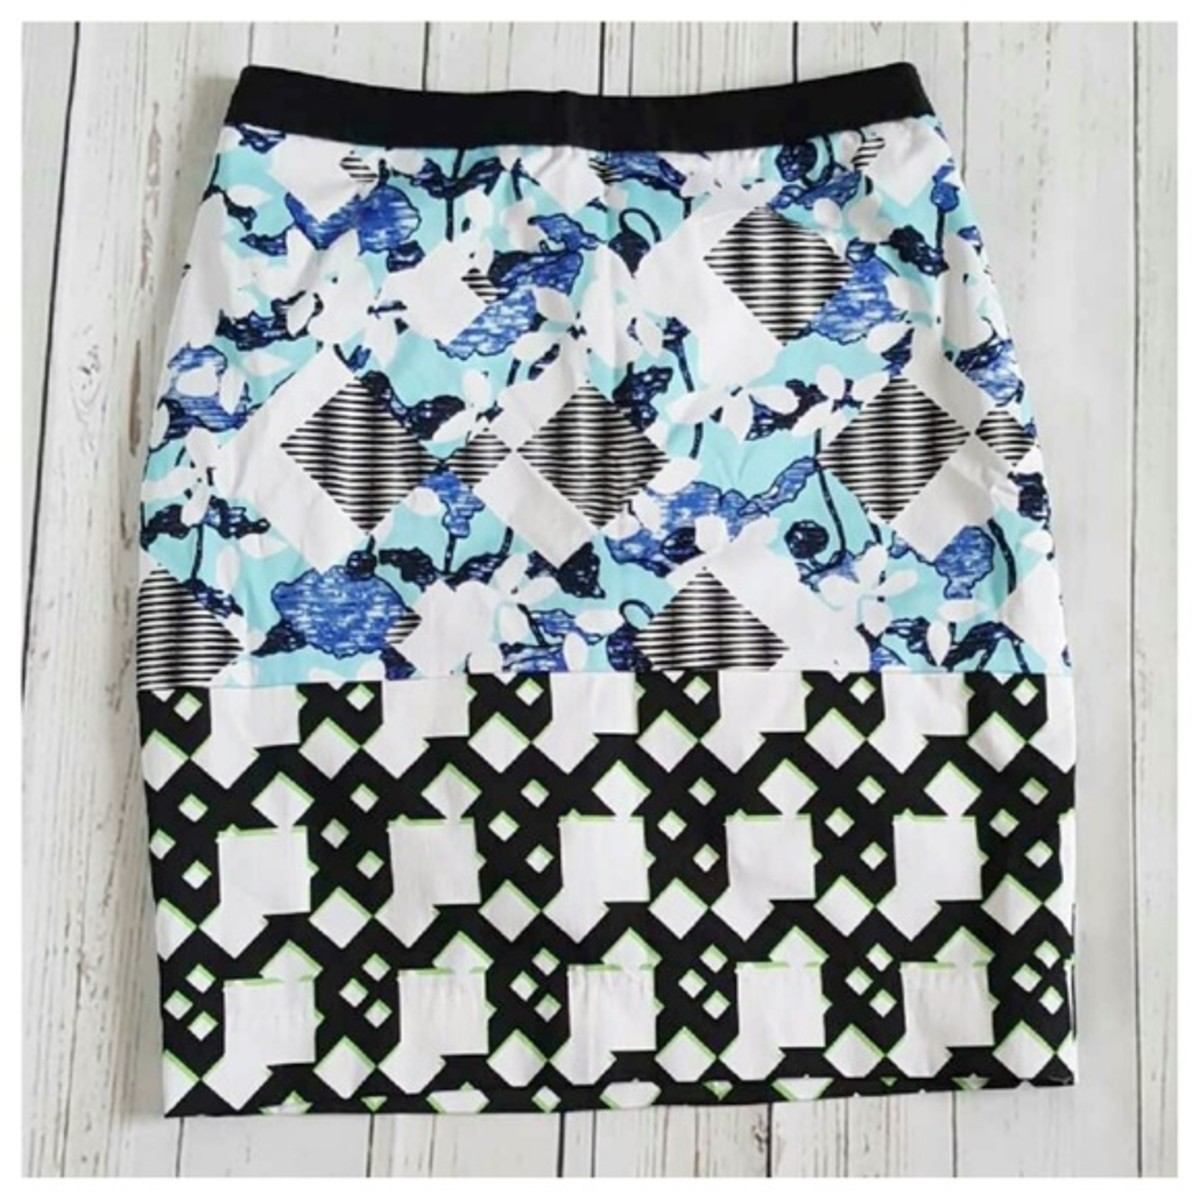 pennys-posh-picks-of-the-week-dont-skirt-this-issue-august-12